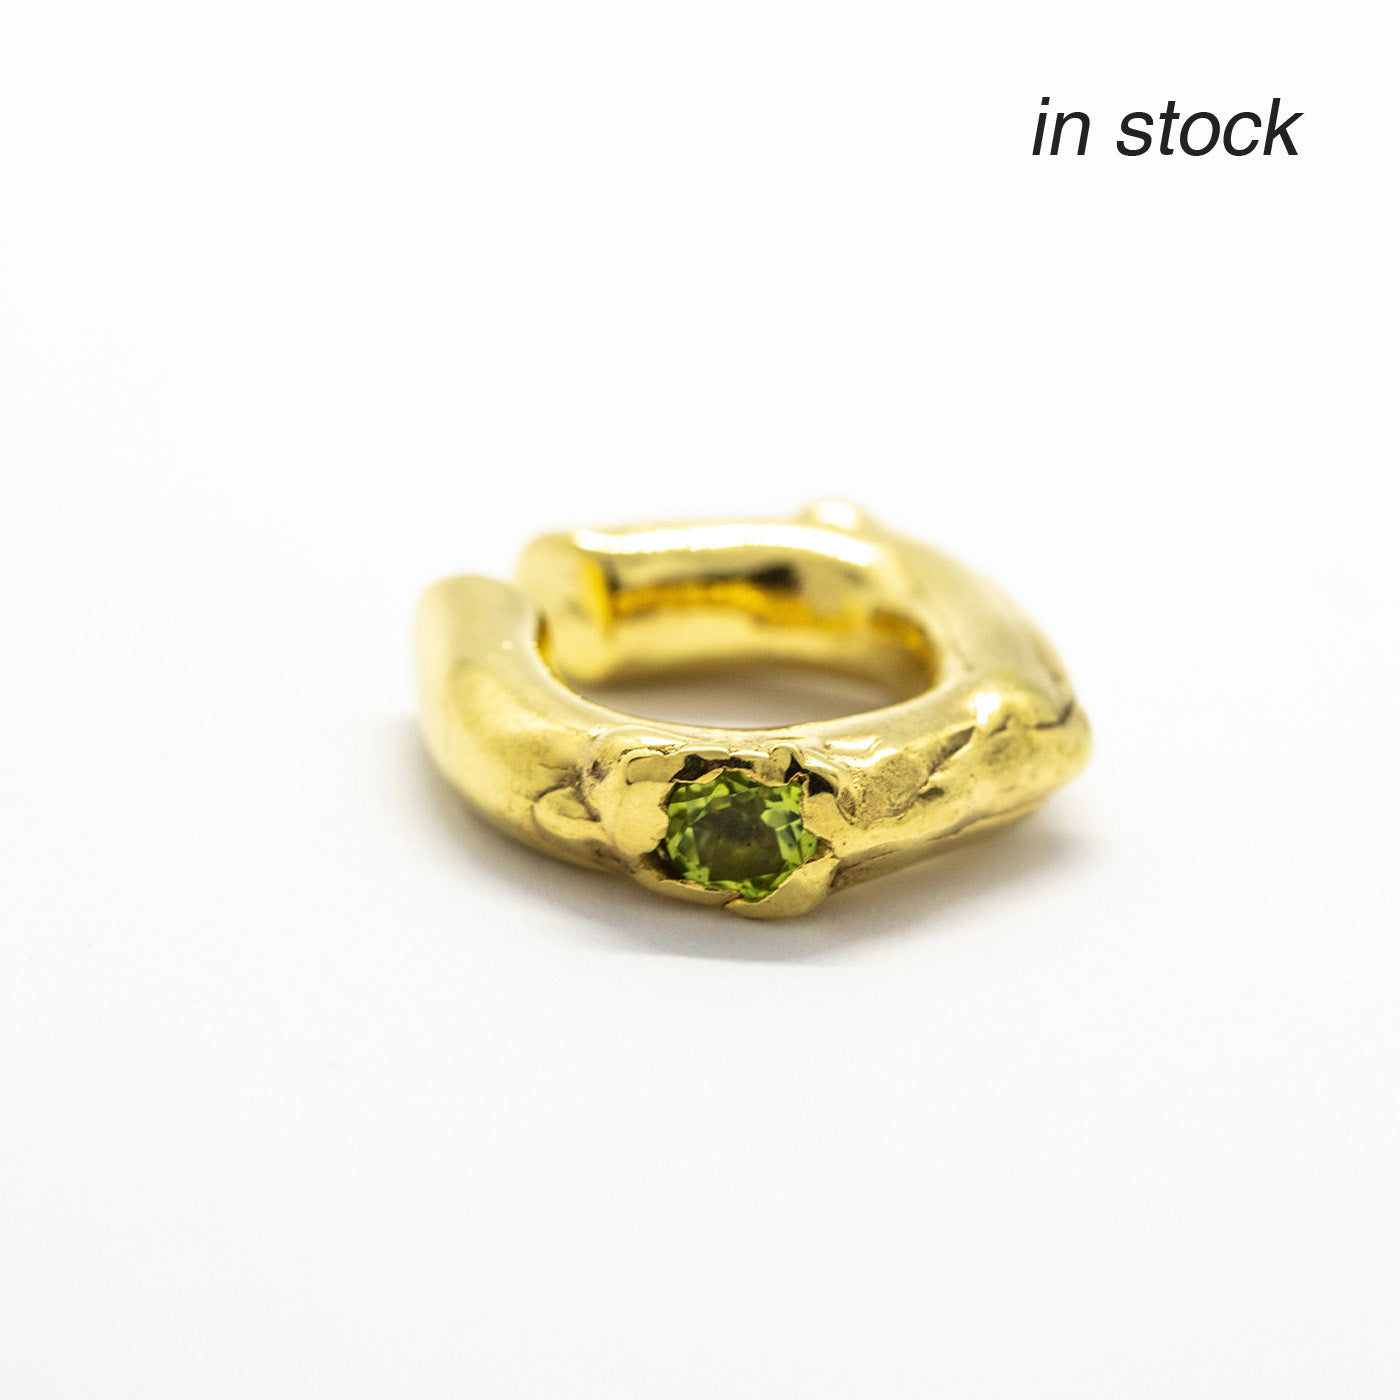 ear cuff askja silver 18ct gold plated green peridot product view innan jewellery independent atelier berlin in stock